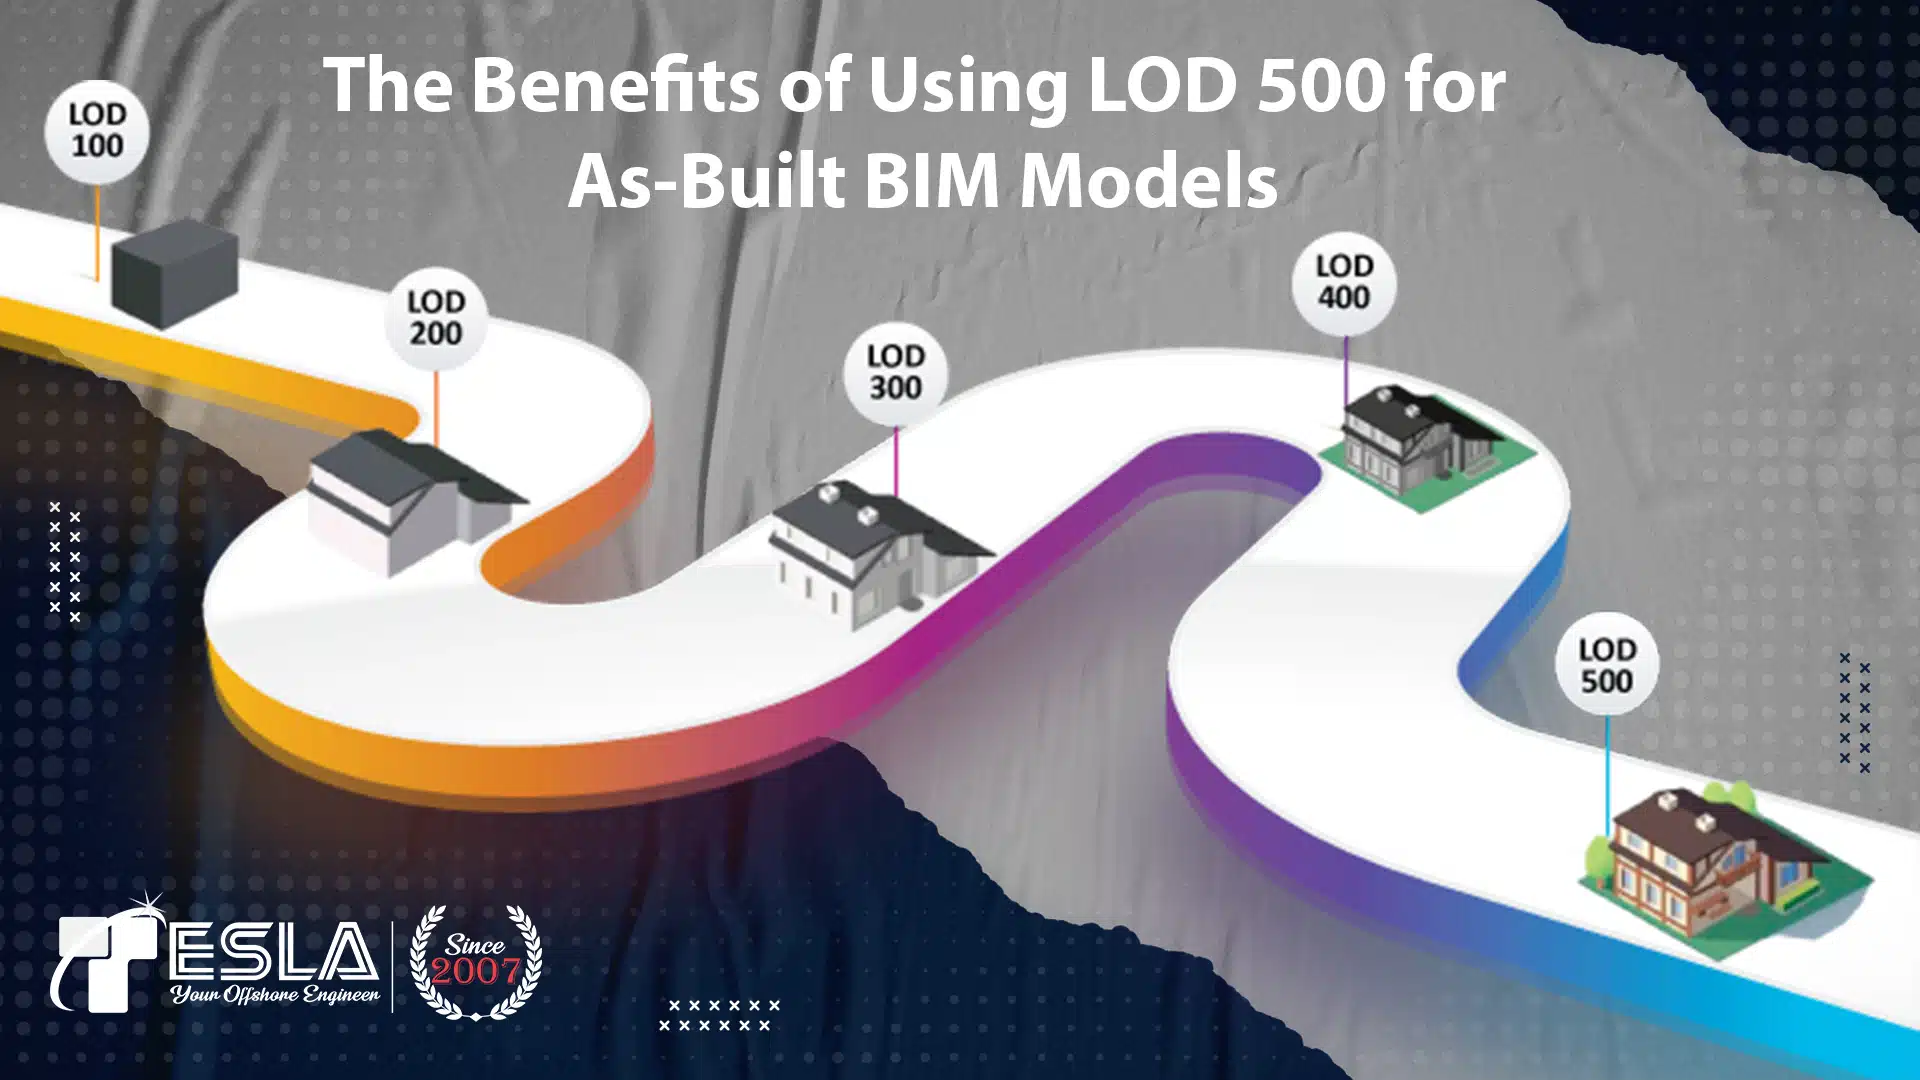 The Benefits of Using LOD 500 for As-Built BIM Models